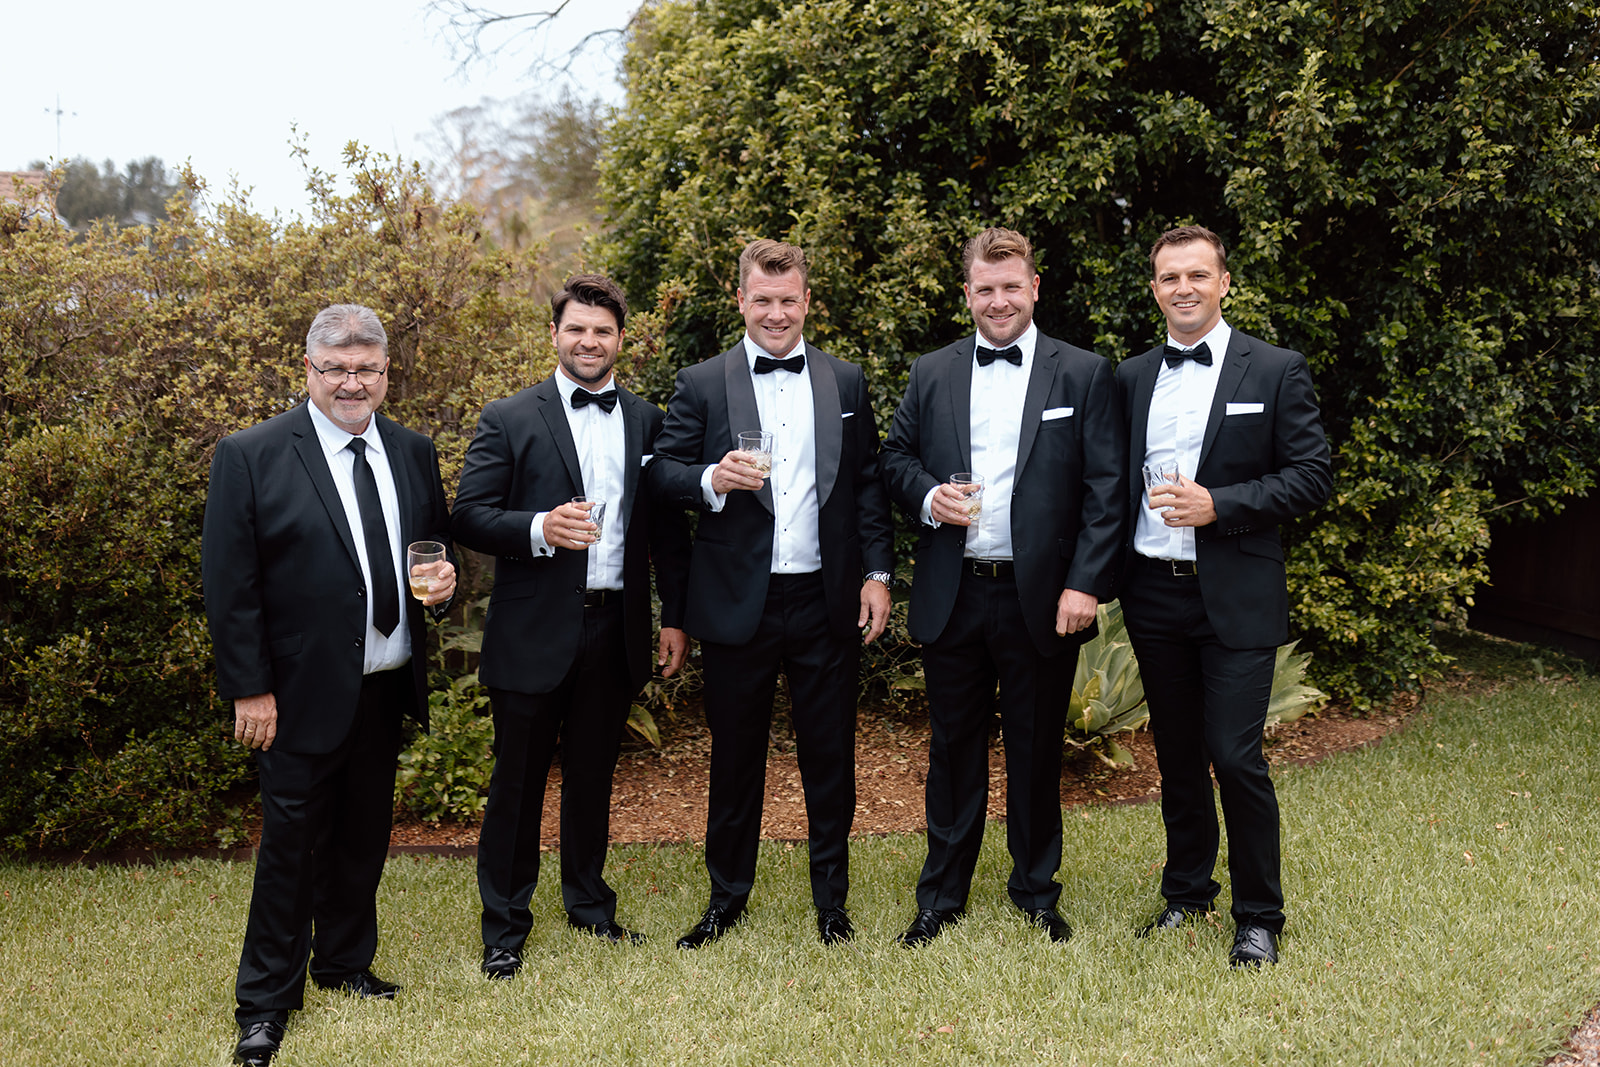 Groom and groomsmen at the wedding in the South Coast The Homestead Berry